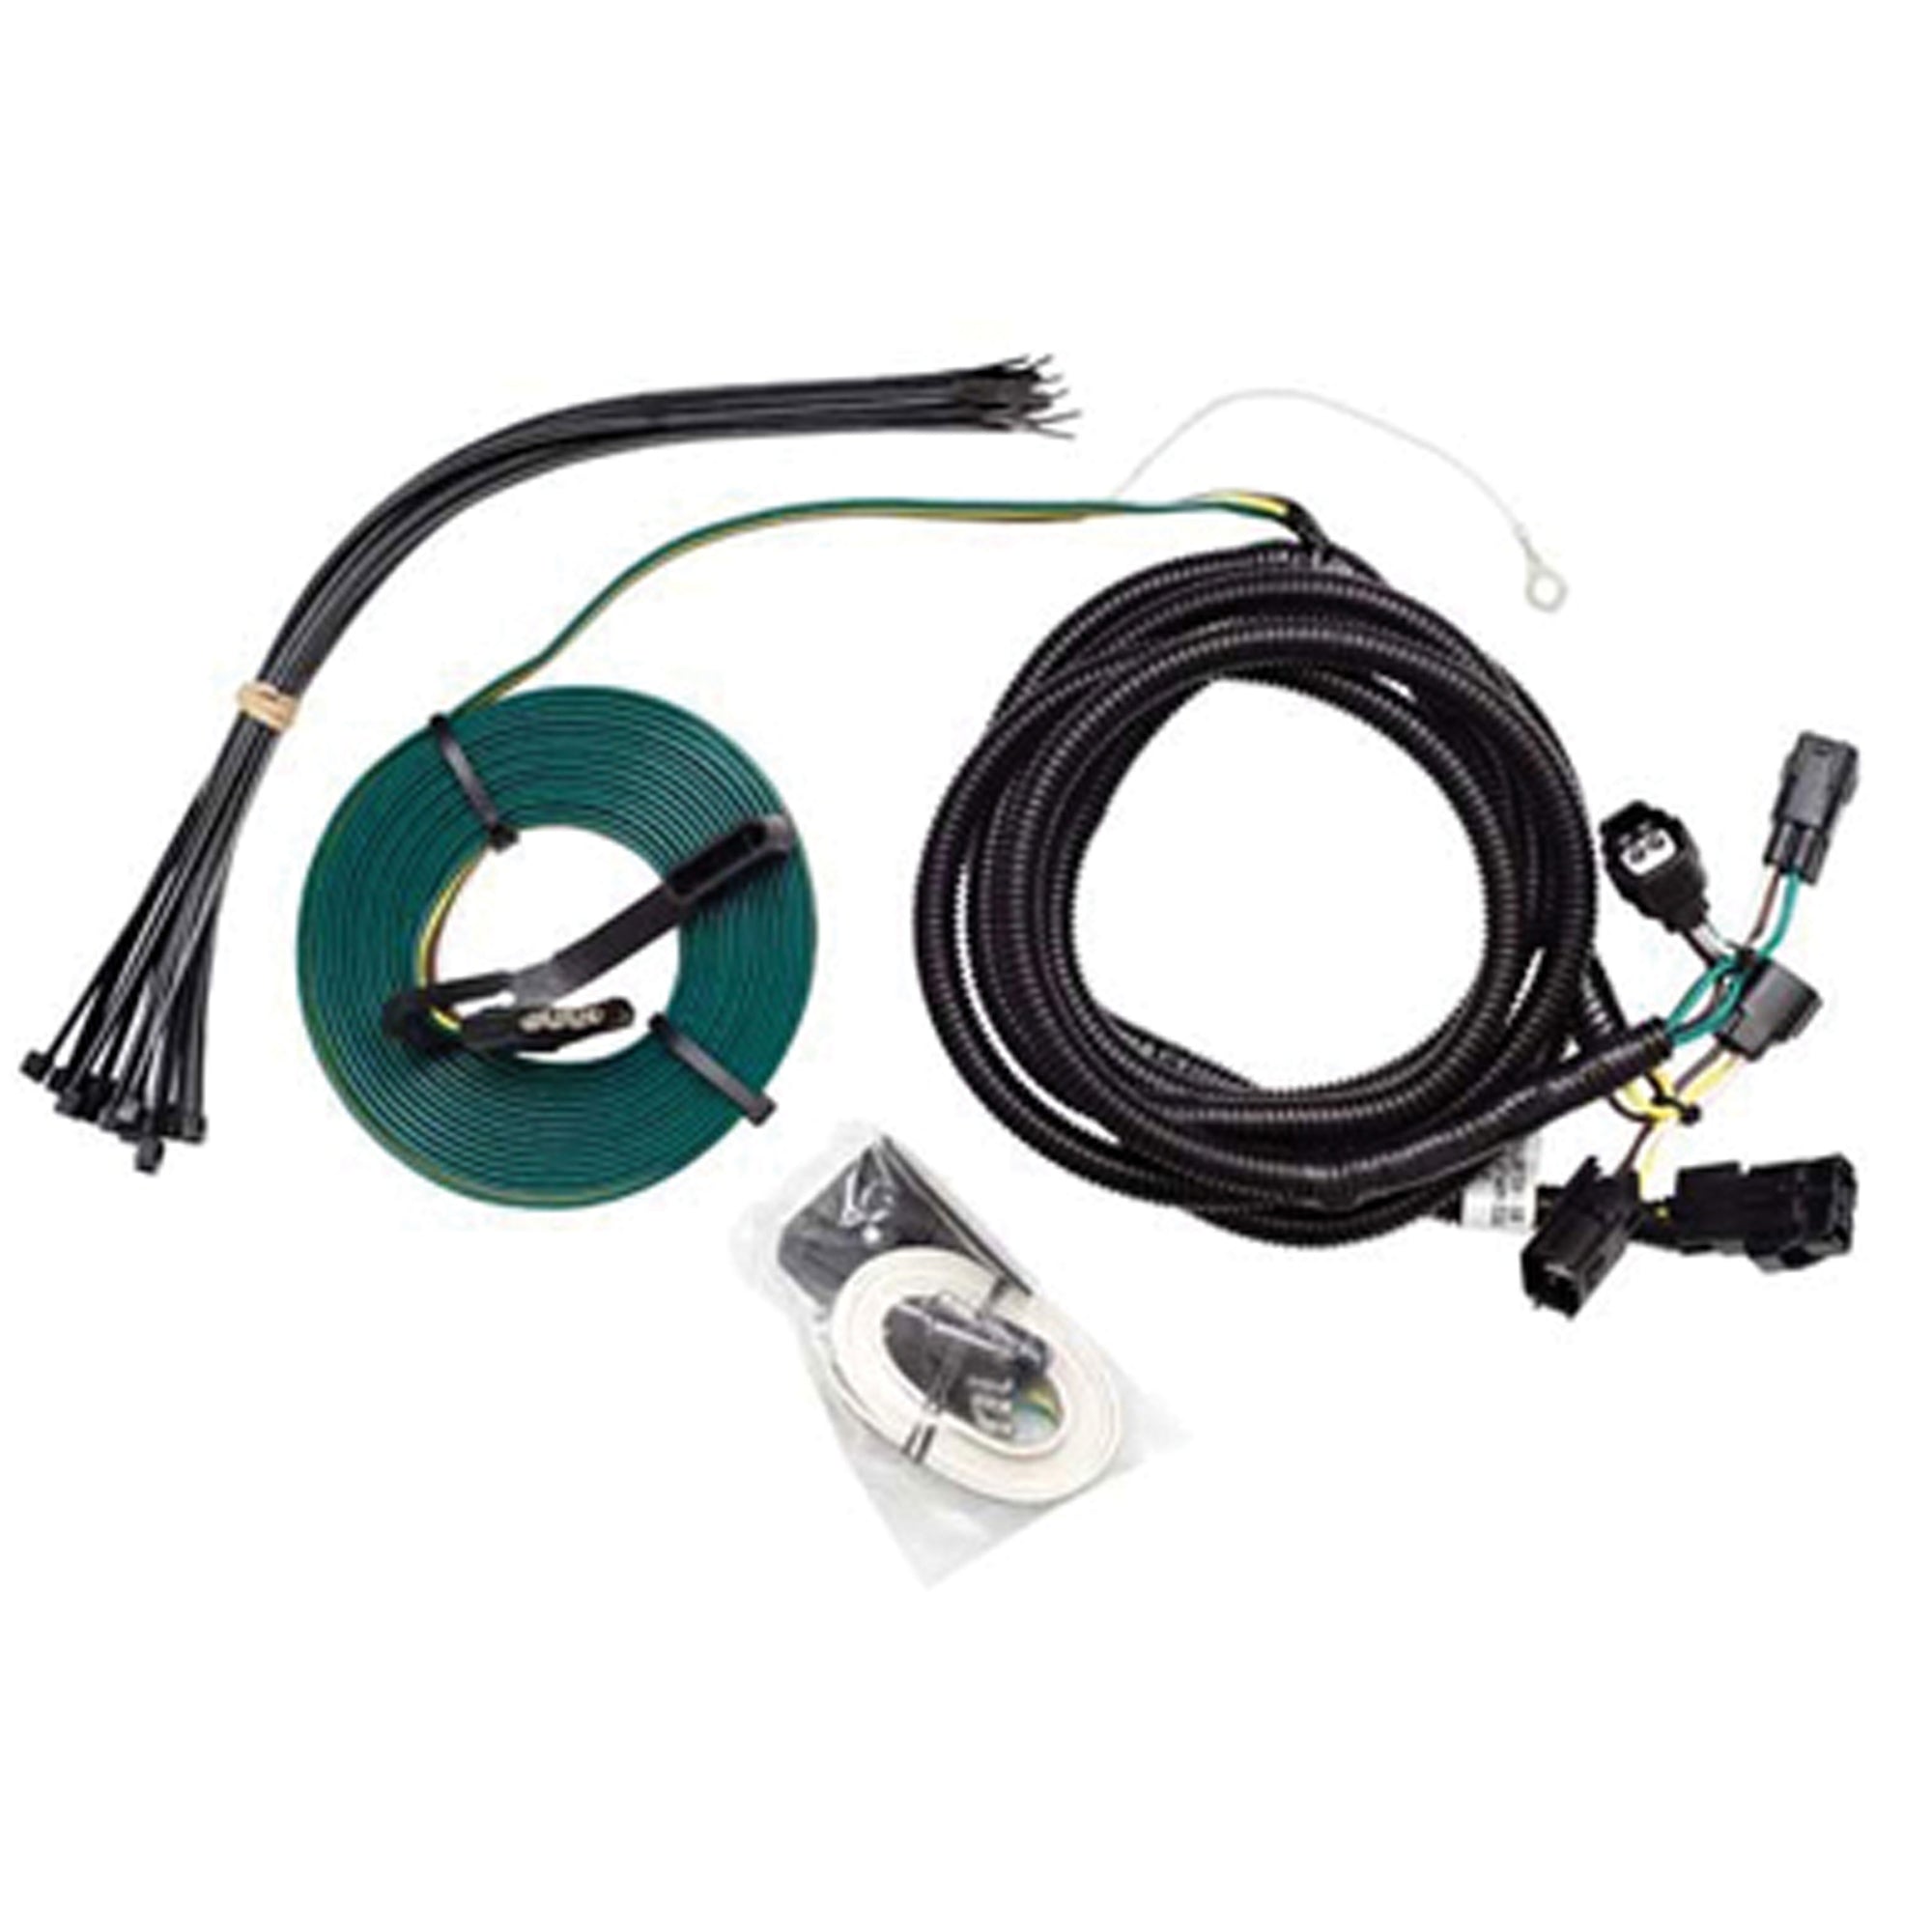 Demco 9523117 Towed Connector Vehicle Wiring Kit - For GMC Acadia/Buick Enclave '13'-15